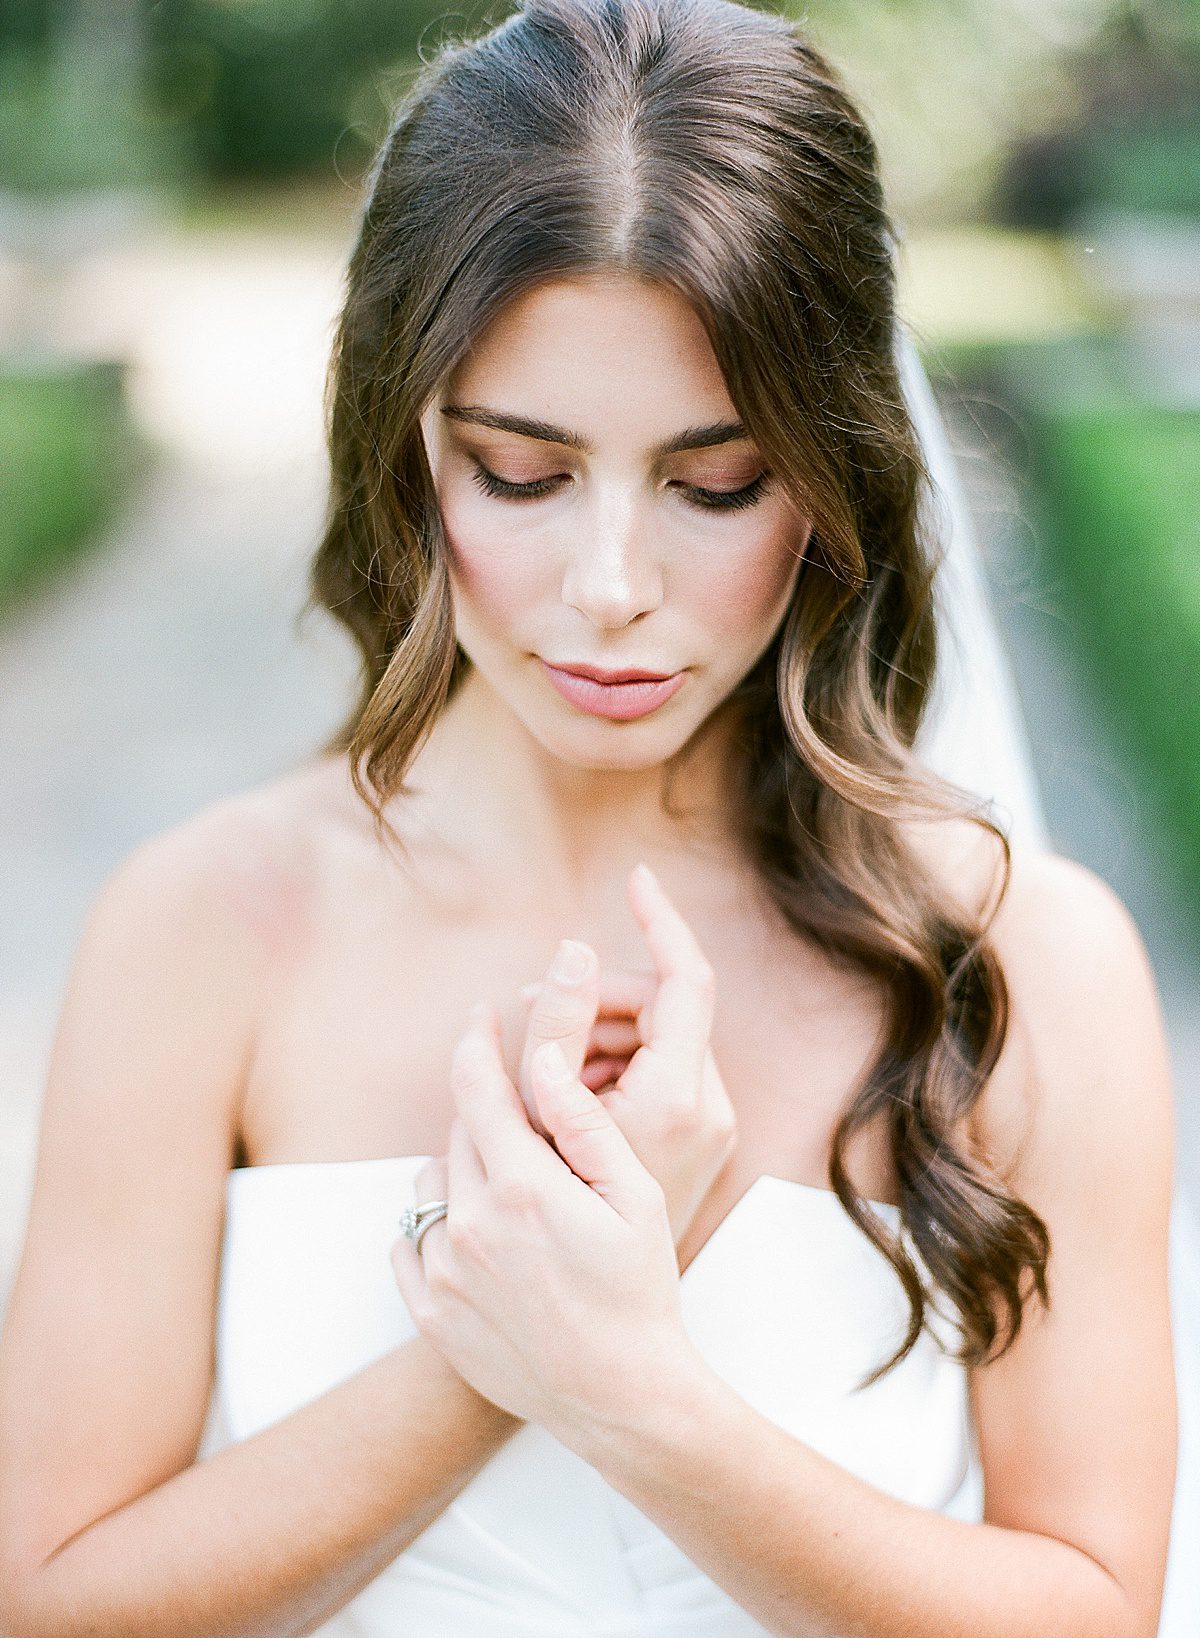 Bride Holding Hands On Chest Looking Down Photo